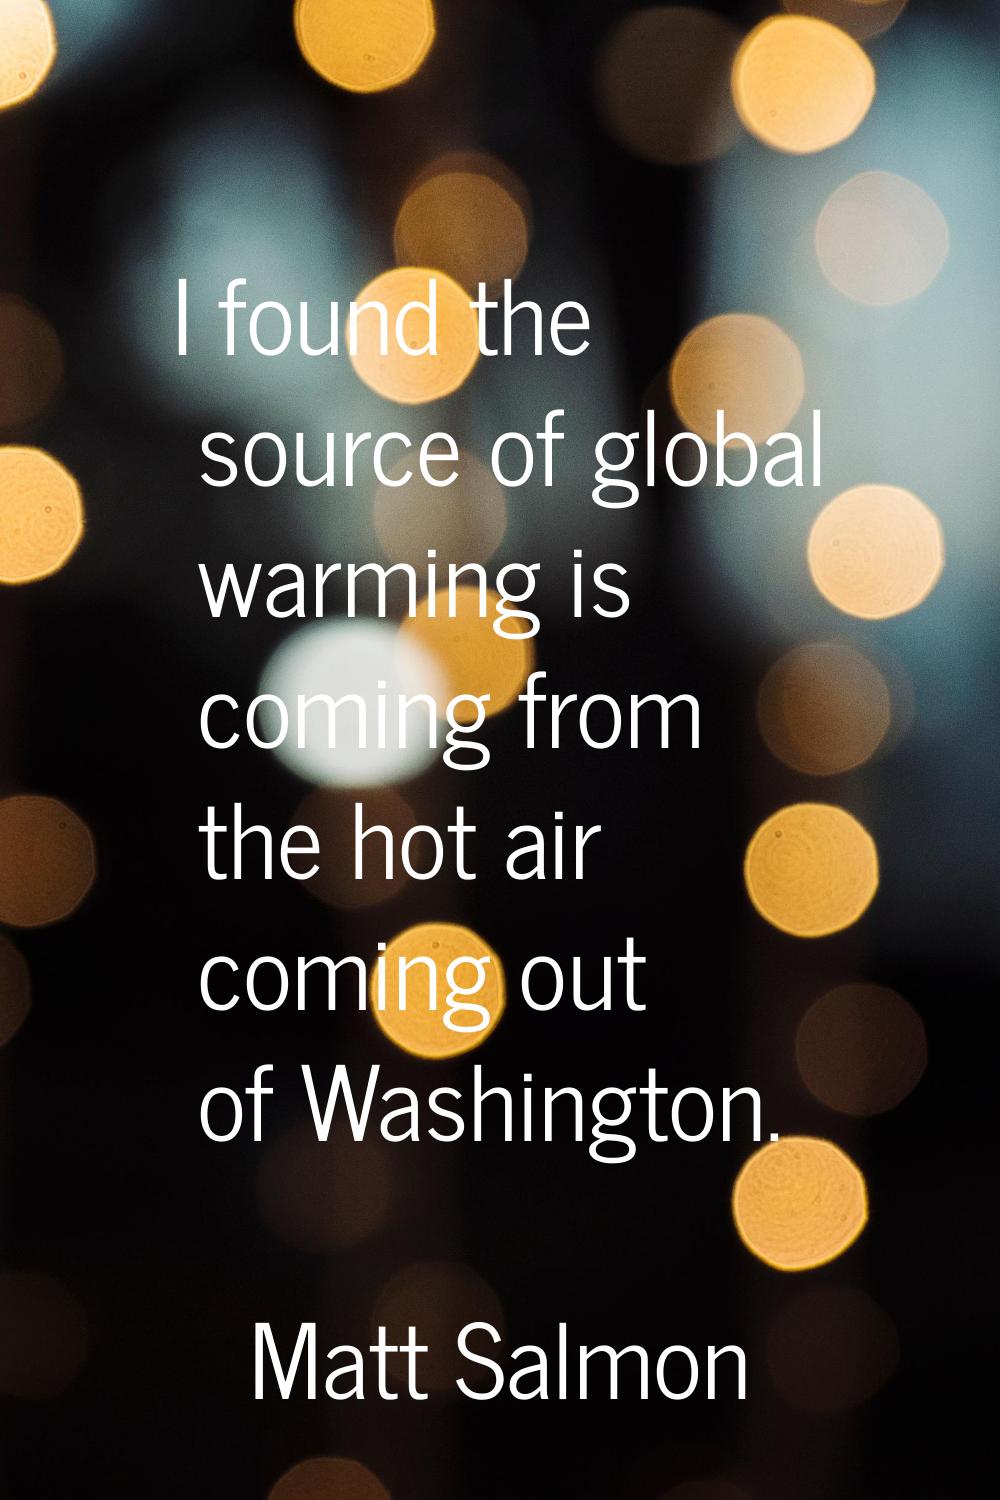 I found the source of global warming is coming from the hot air coming out of Washington.